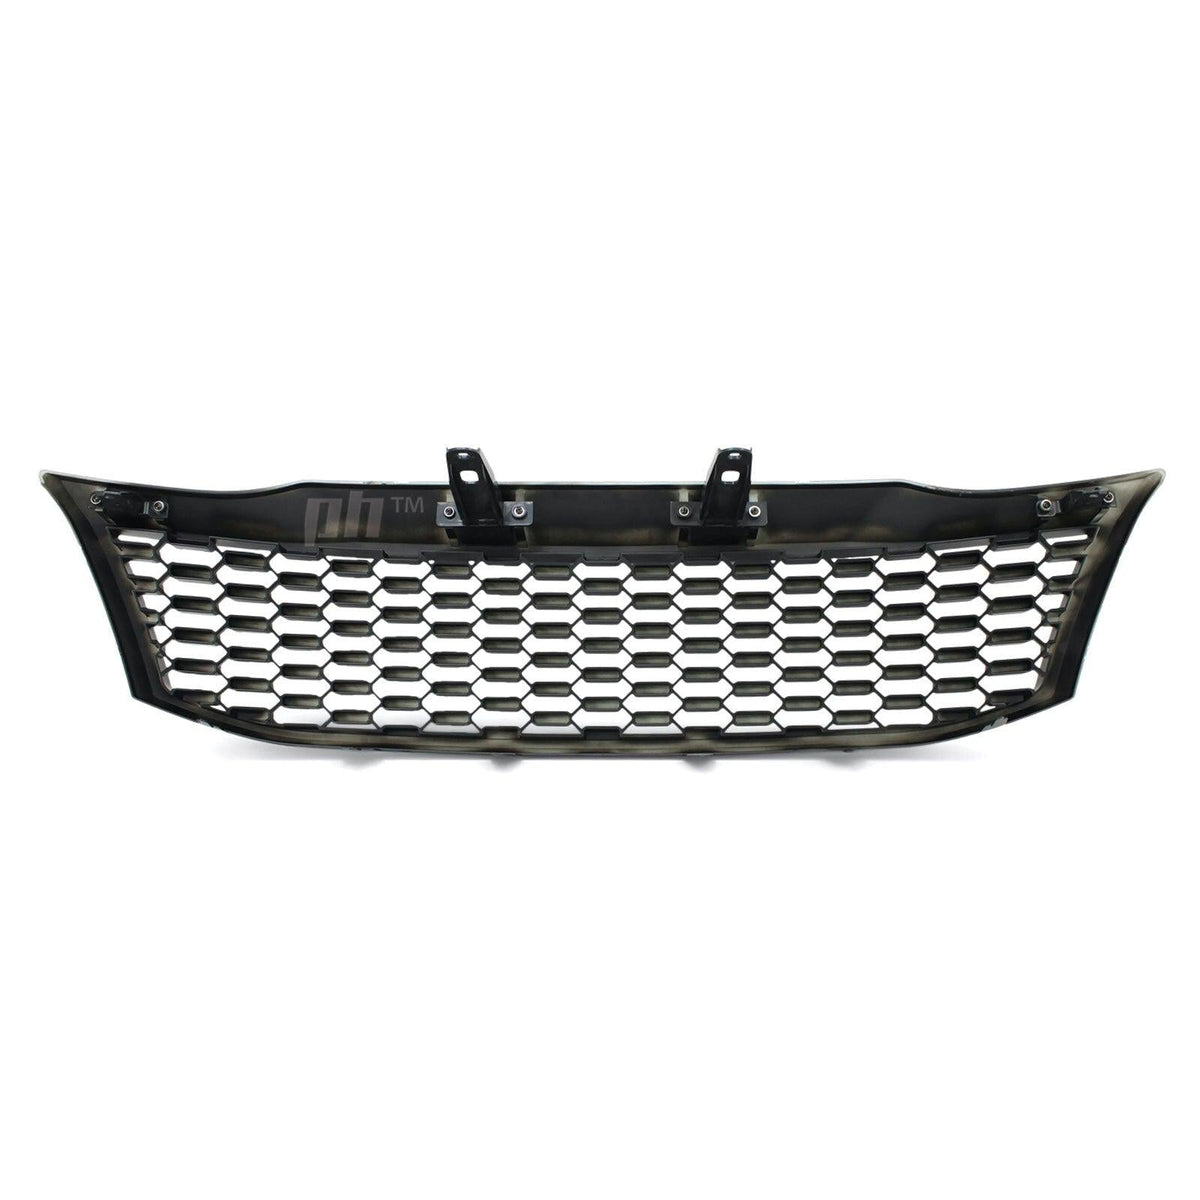 Panel House - Grill Block Mesh Style BLACK Edition Fits Toyota Hilux N70 2011 - 2014 Facelift - 4X4OC™ | 4x4 Offroad Centre